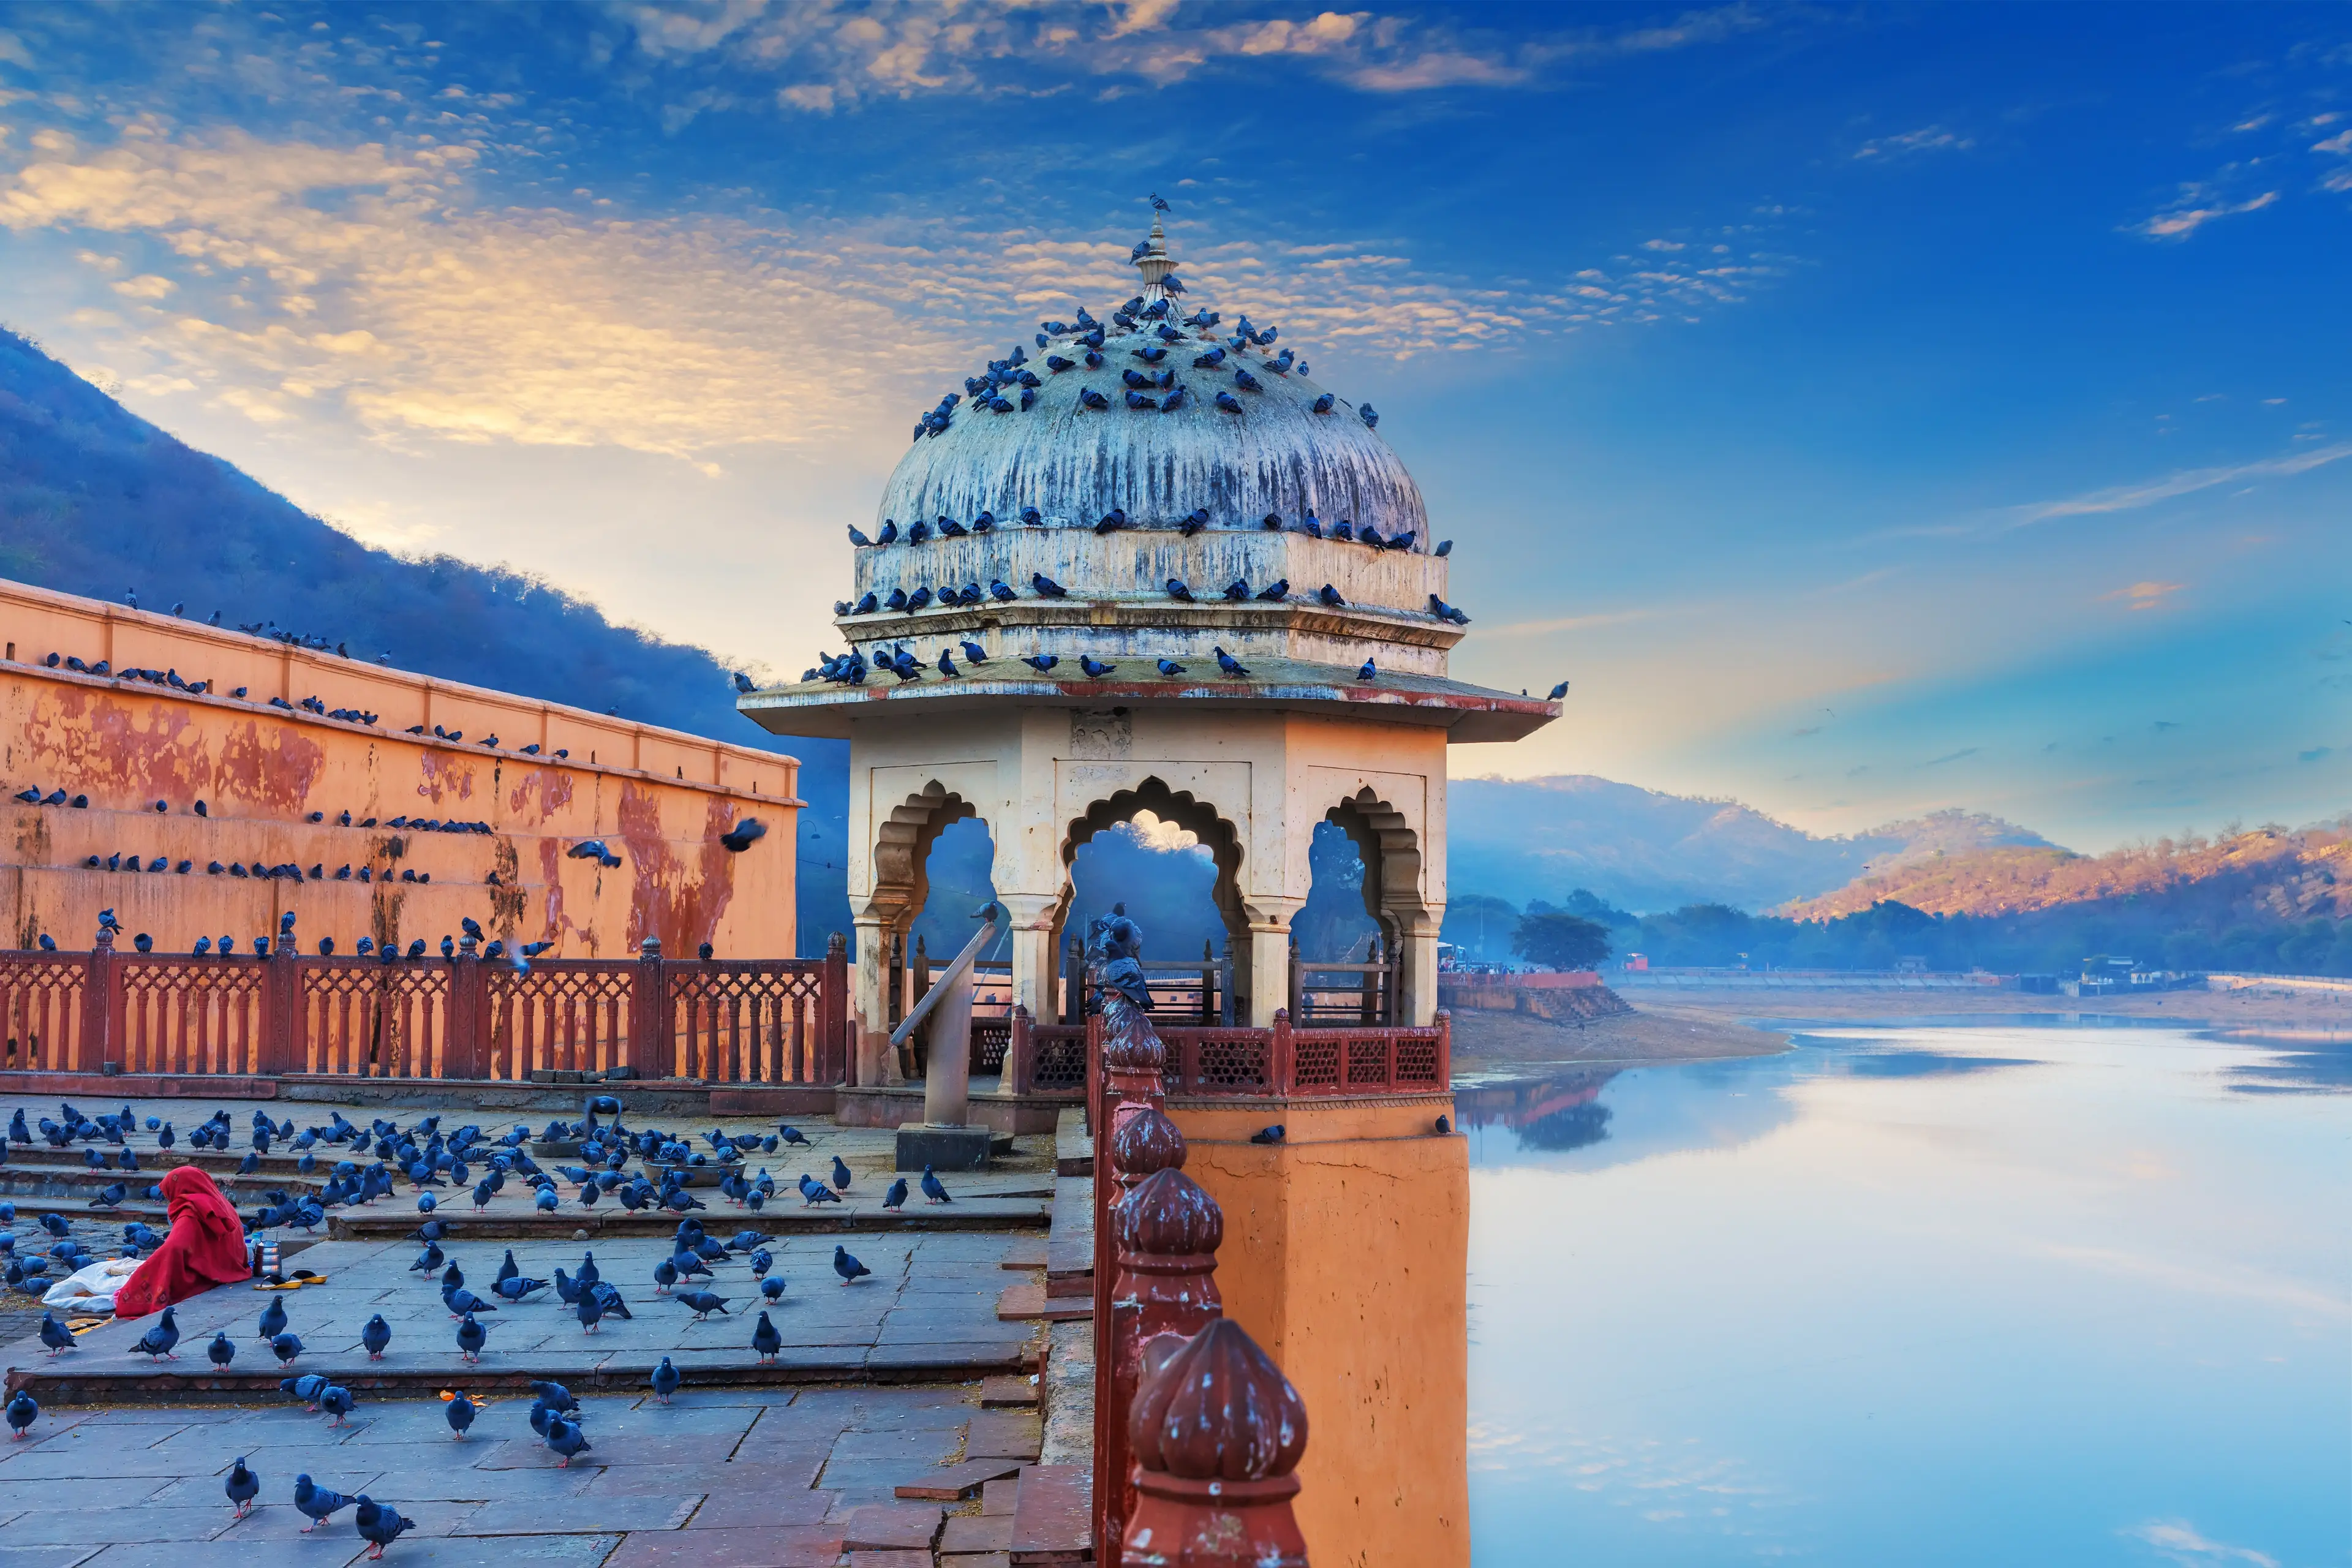 2-Day Local Experience: Sightseeing, Cuisine and Shopping in Jaipur